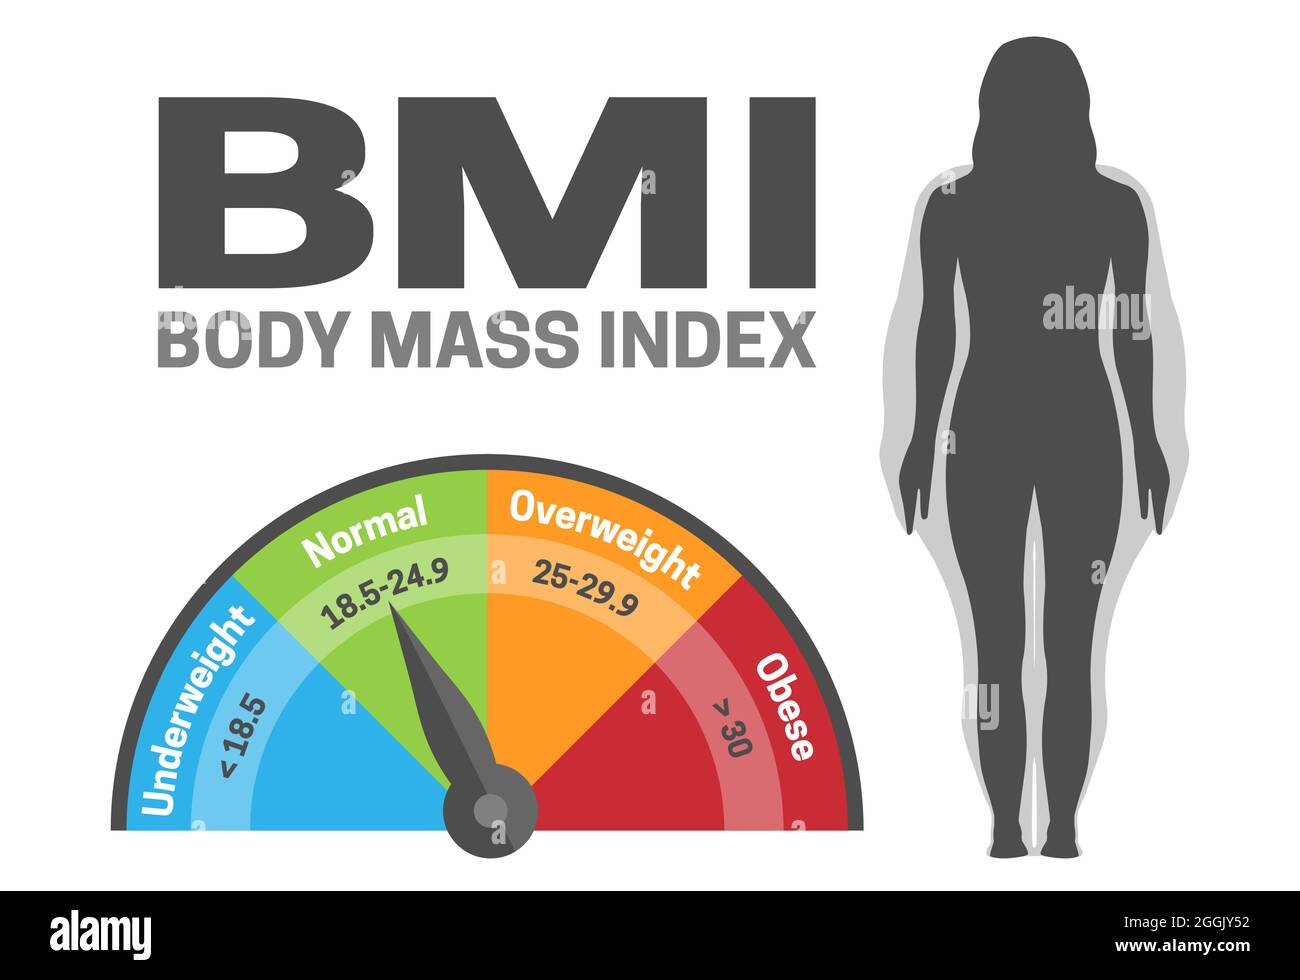 https://c8.alamy.com/comp/2GGJY52/bmi-body-mass-index-infographic-vector-illustration-with-woman-silhouette-from-normal-to-obese-weight-weight-loss-or-gain-2GGJY52.jpg